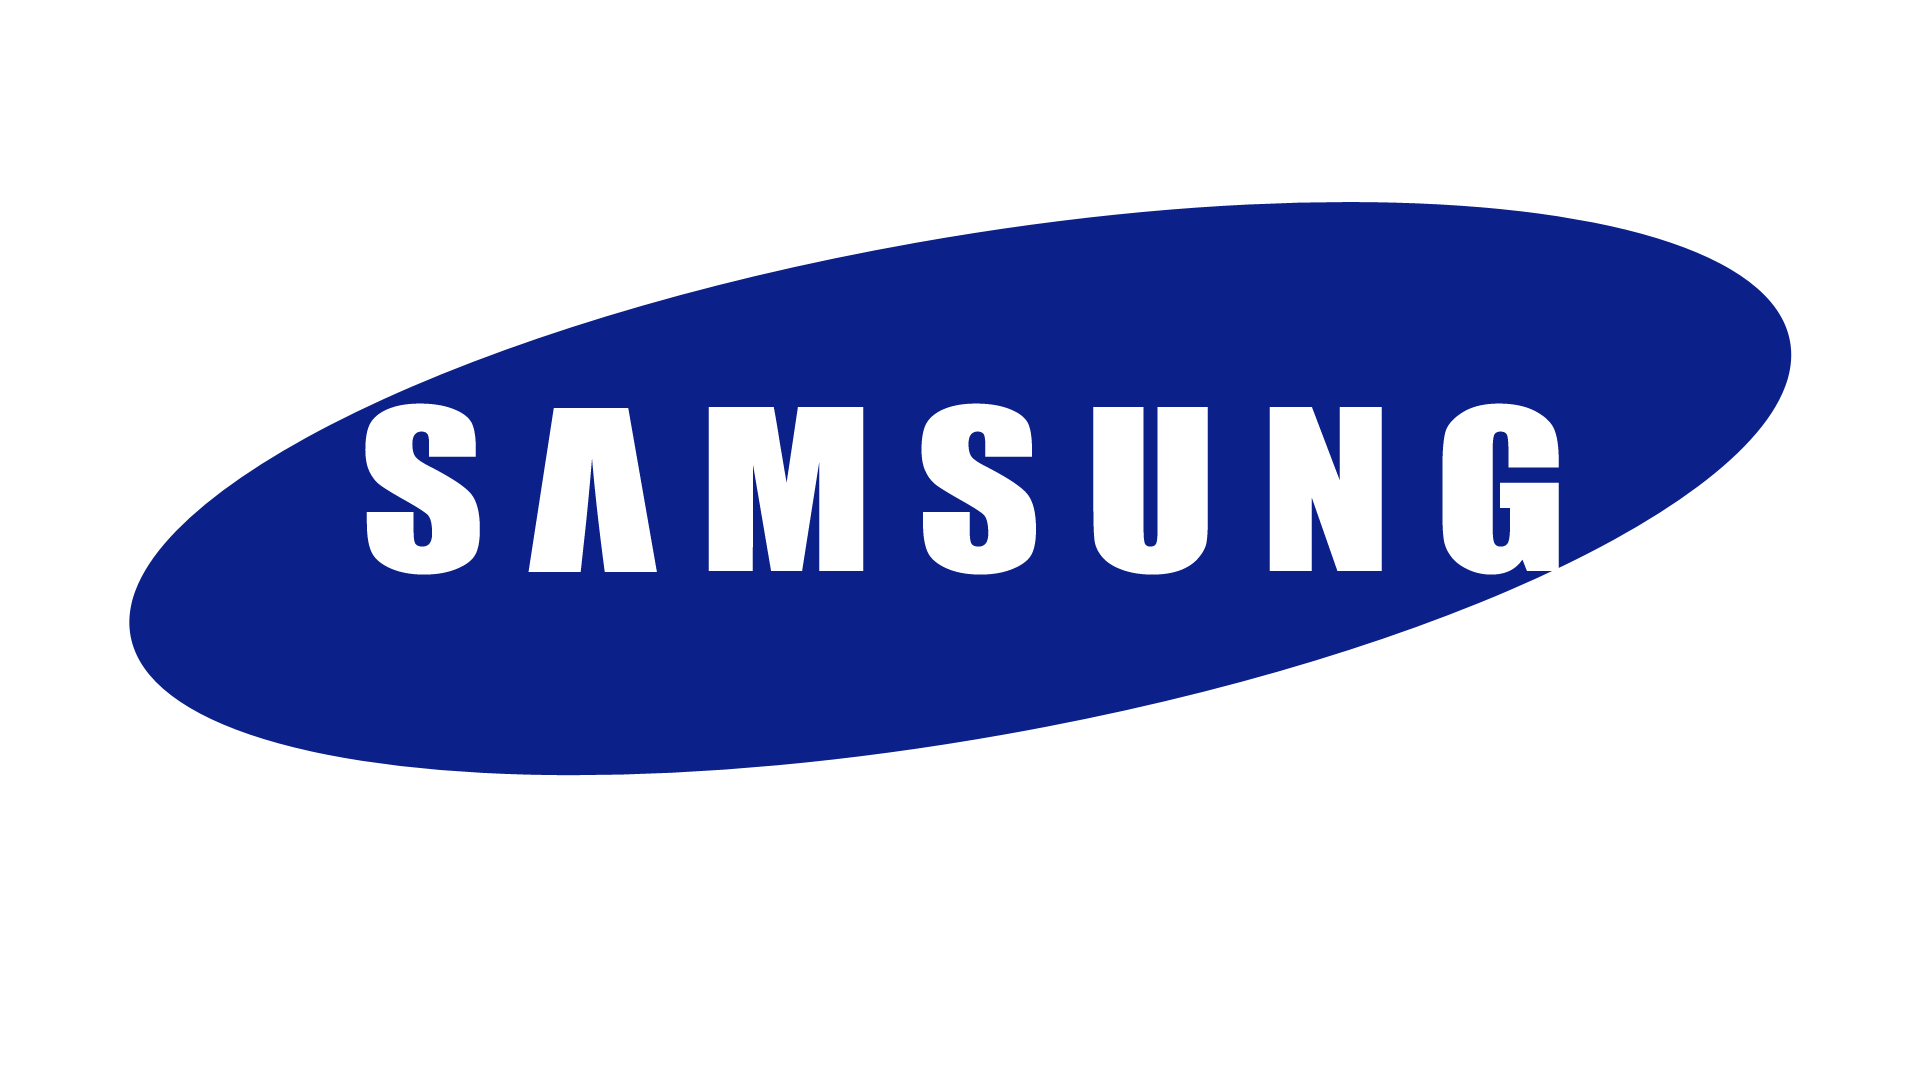 Q3 Samsung’s Global Smartphone Market Share Has Increased Significantly, Compared To the Previous Quarter